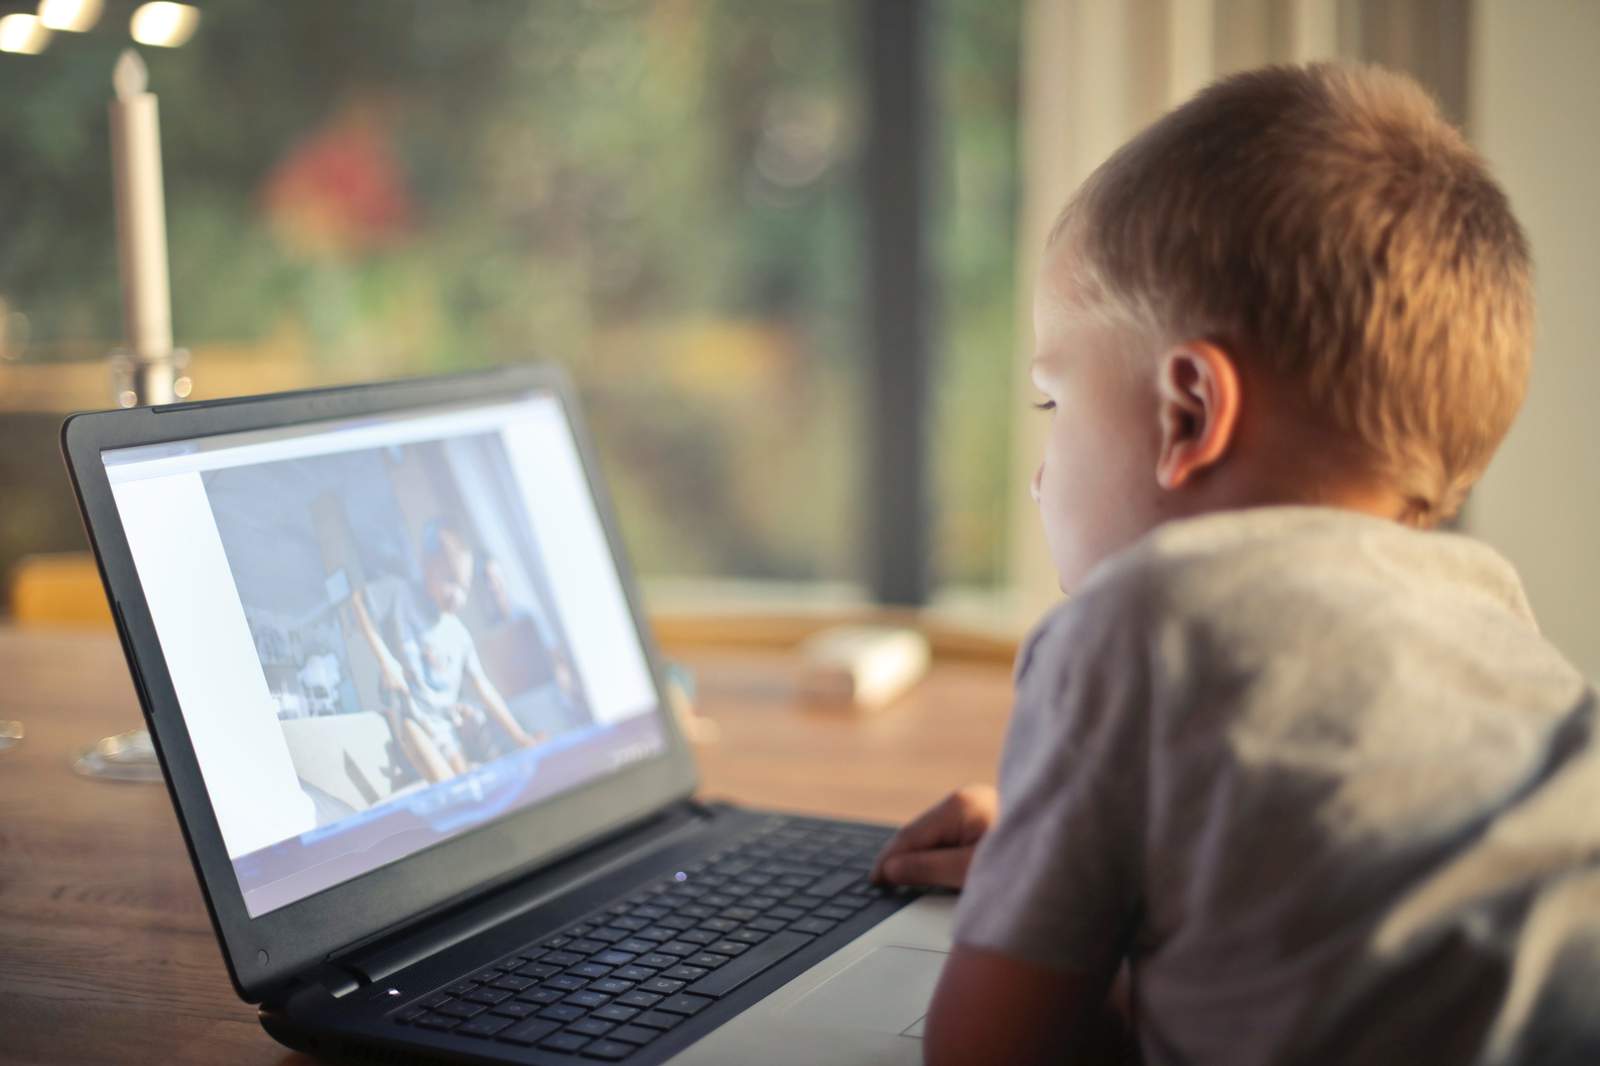 10 fun, educational websites your kids will love to visit while stuck at home